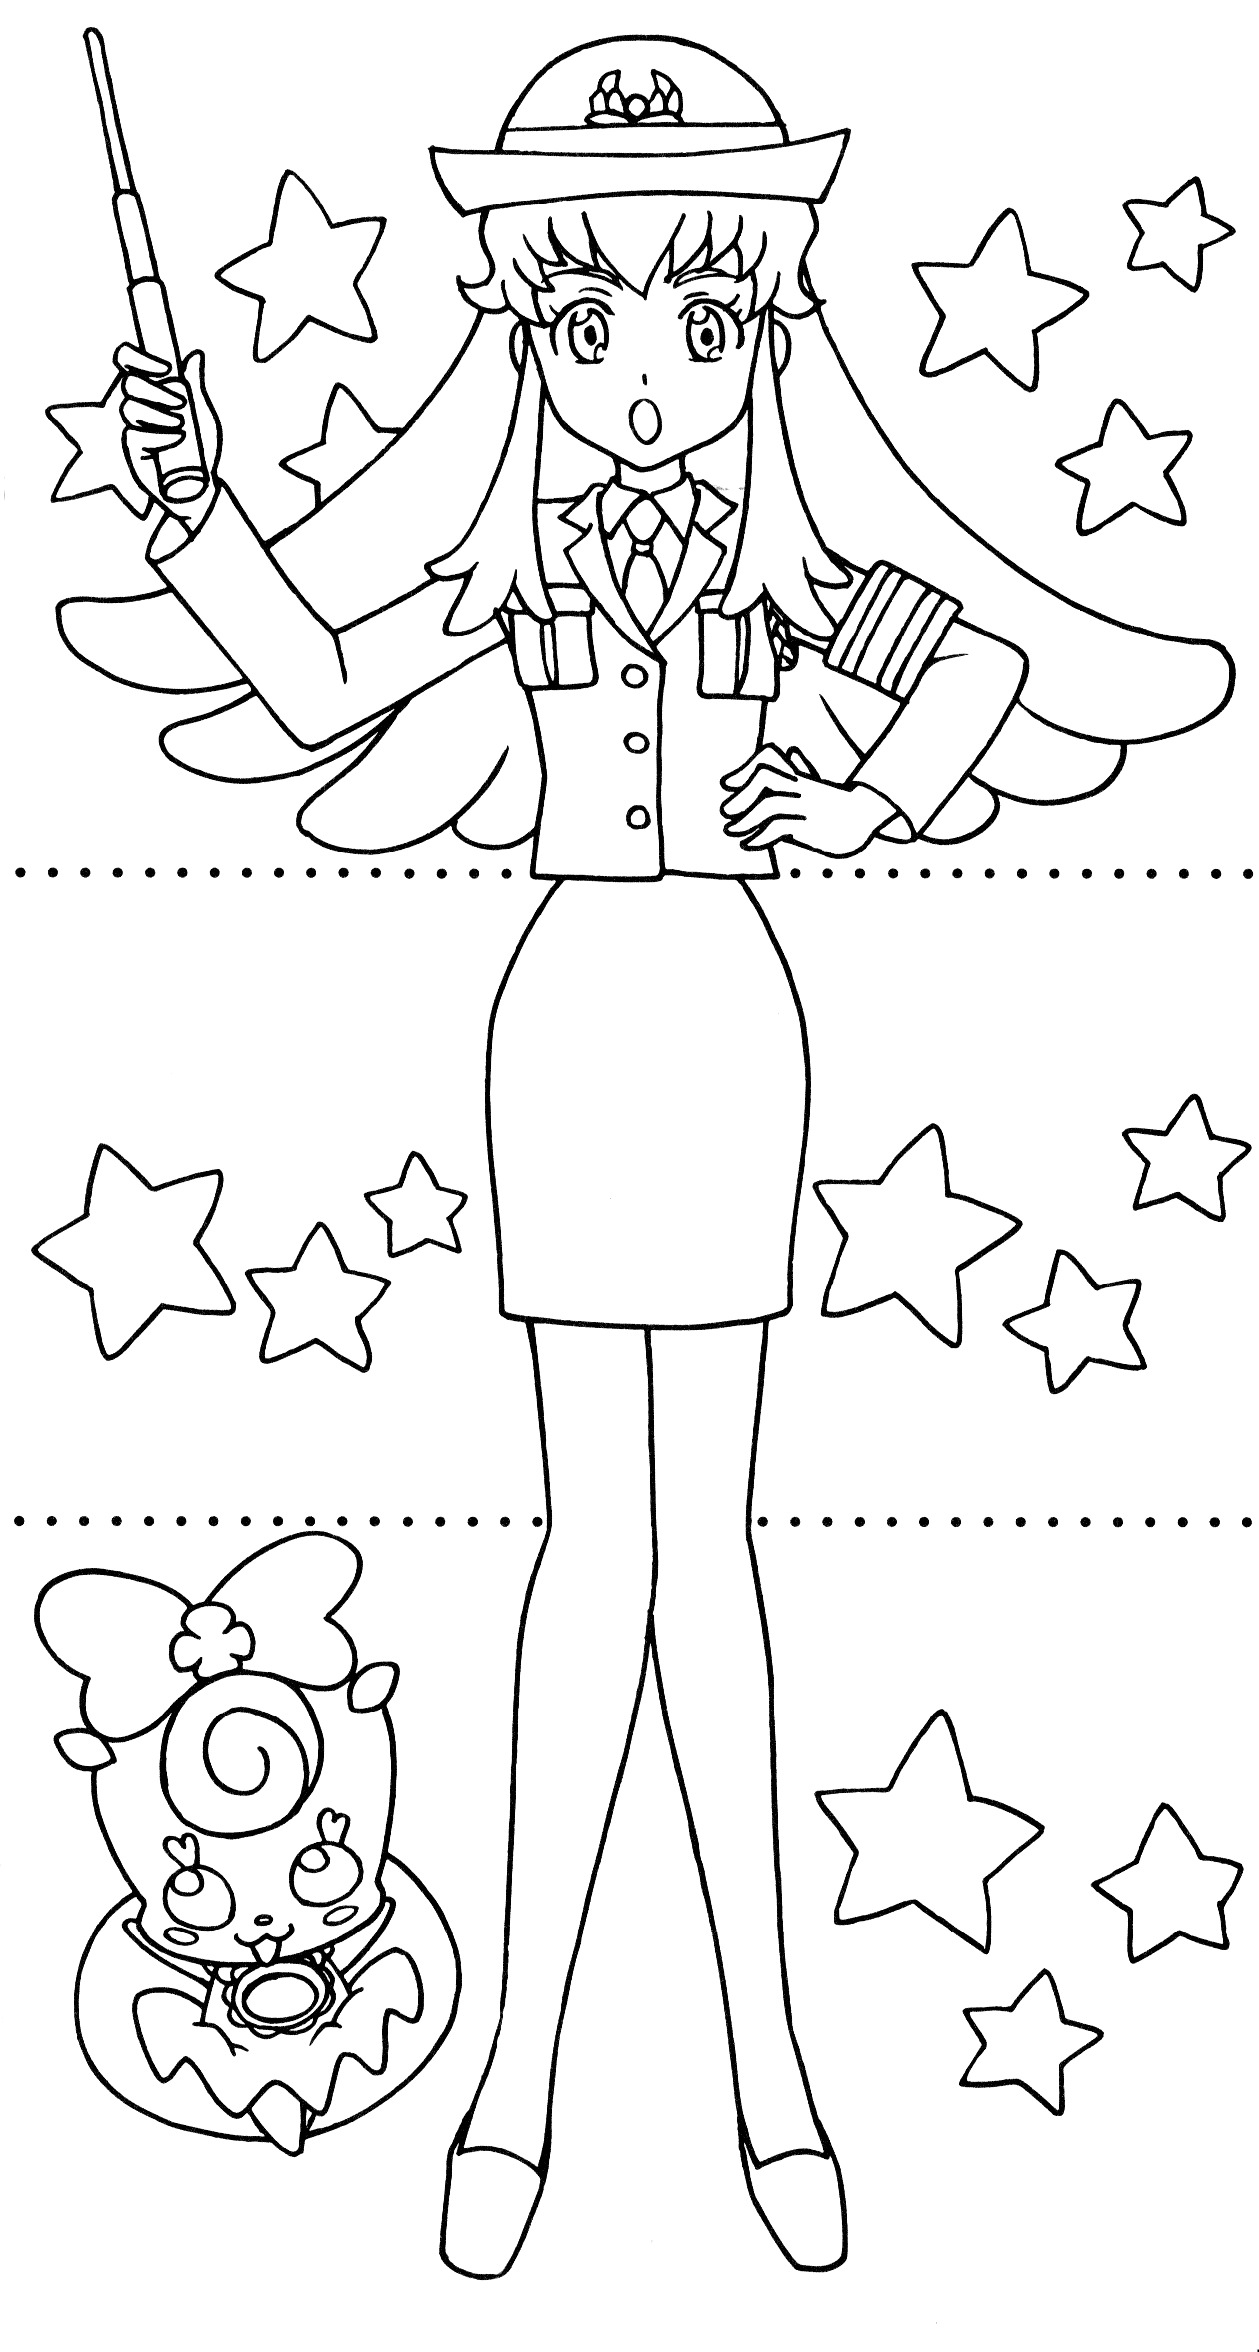 Happiness Charge Precure Dressup Coloring Book 7